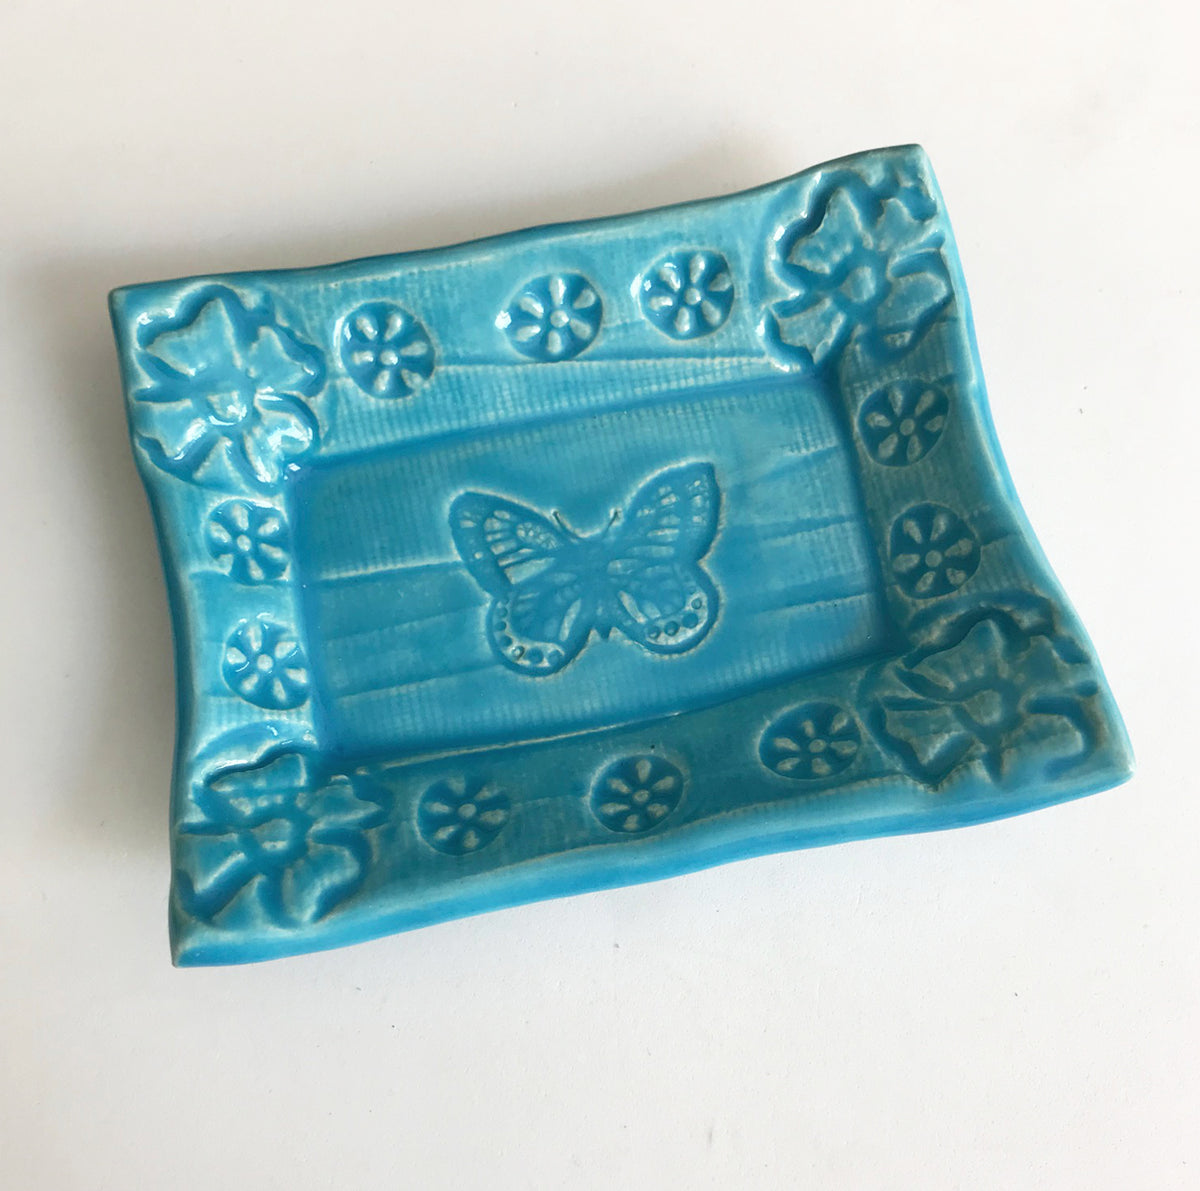 Cute Little Soap Dish - Butterfly  - Stock Colors